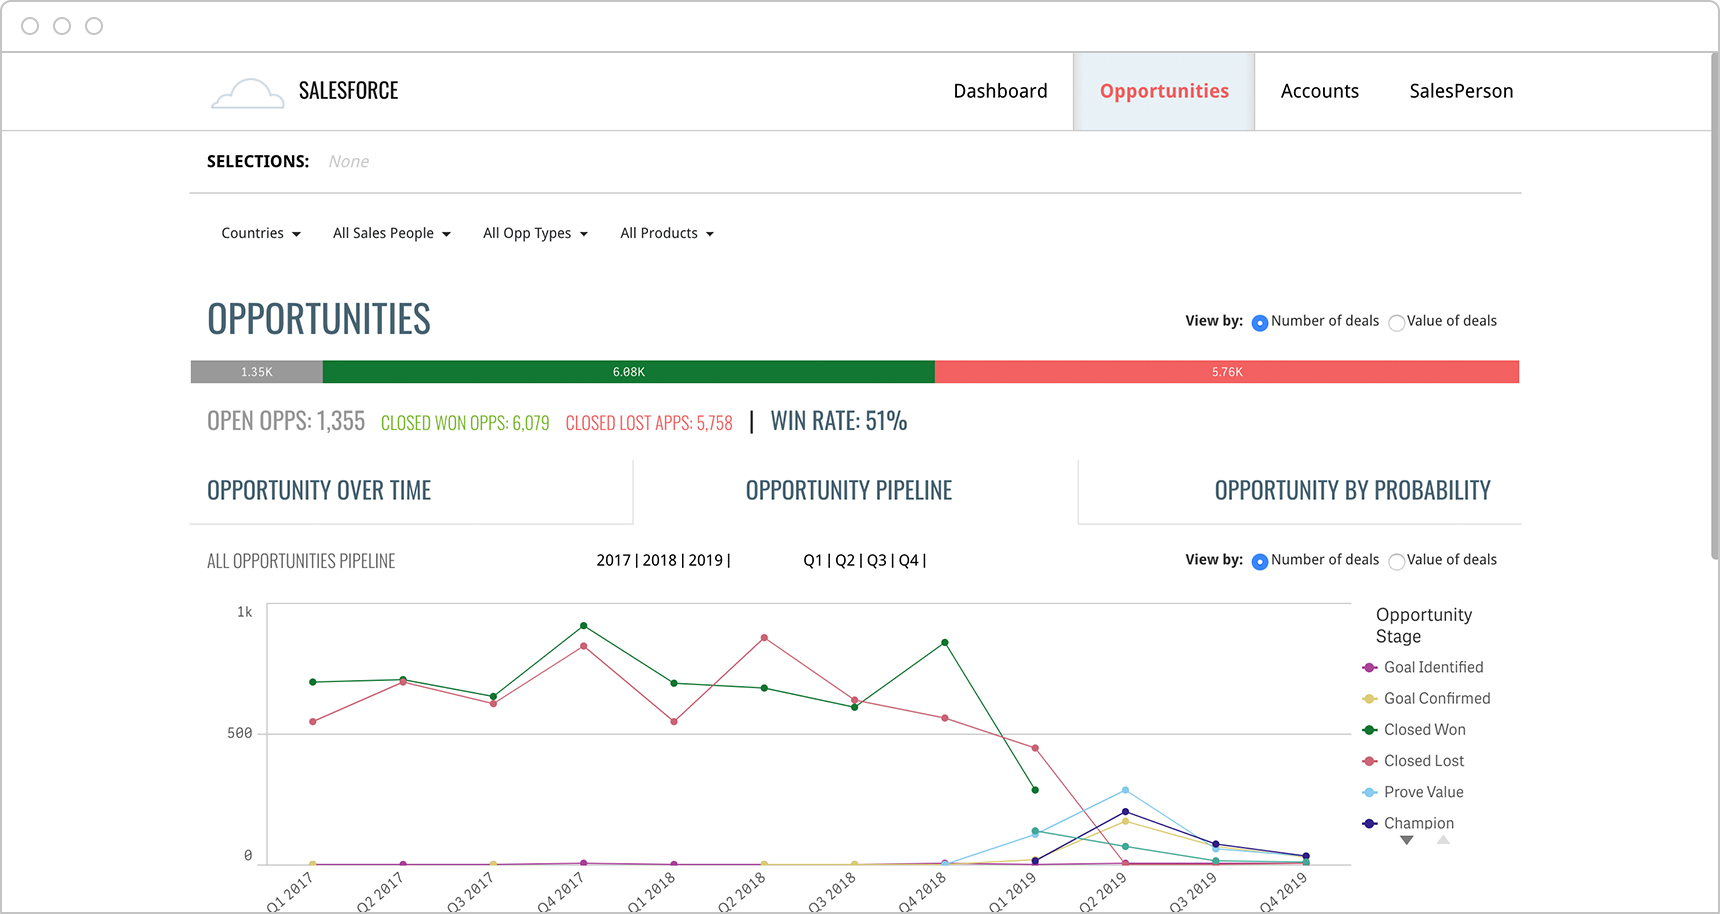 Qlik Salesforce dashboard allows salespeople to analyze pipeline and opportunities by probability by any time period.